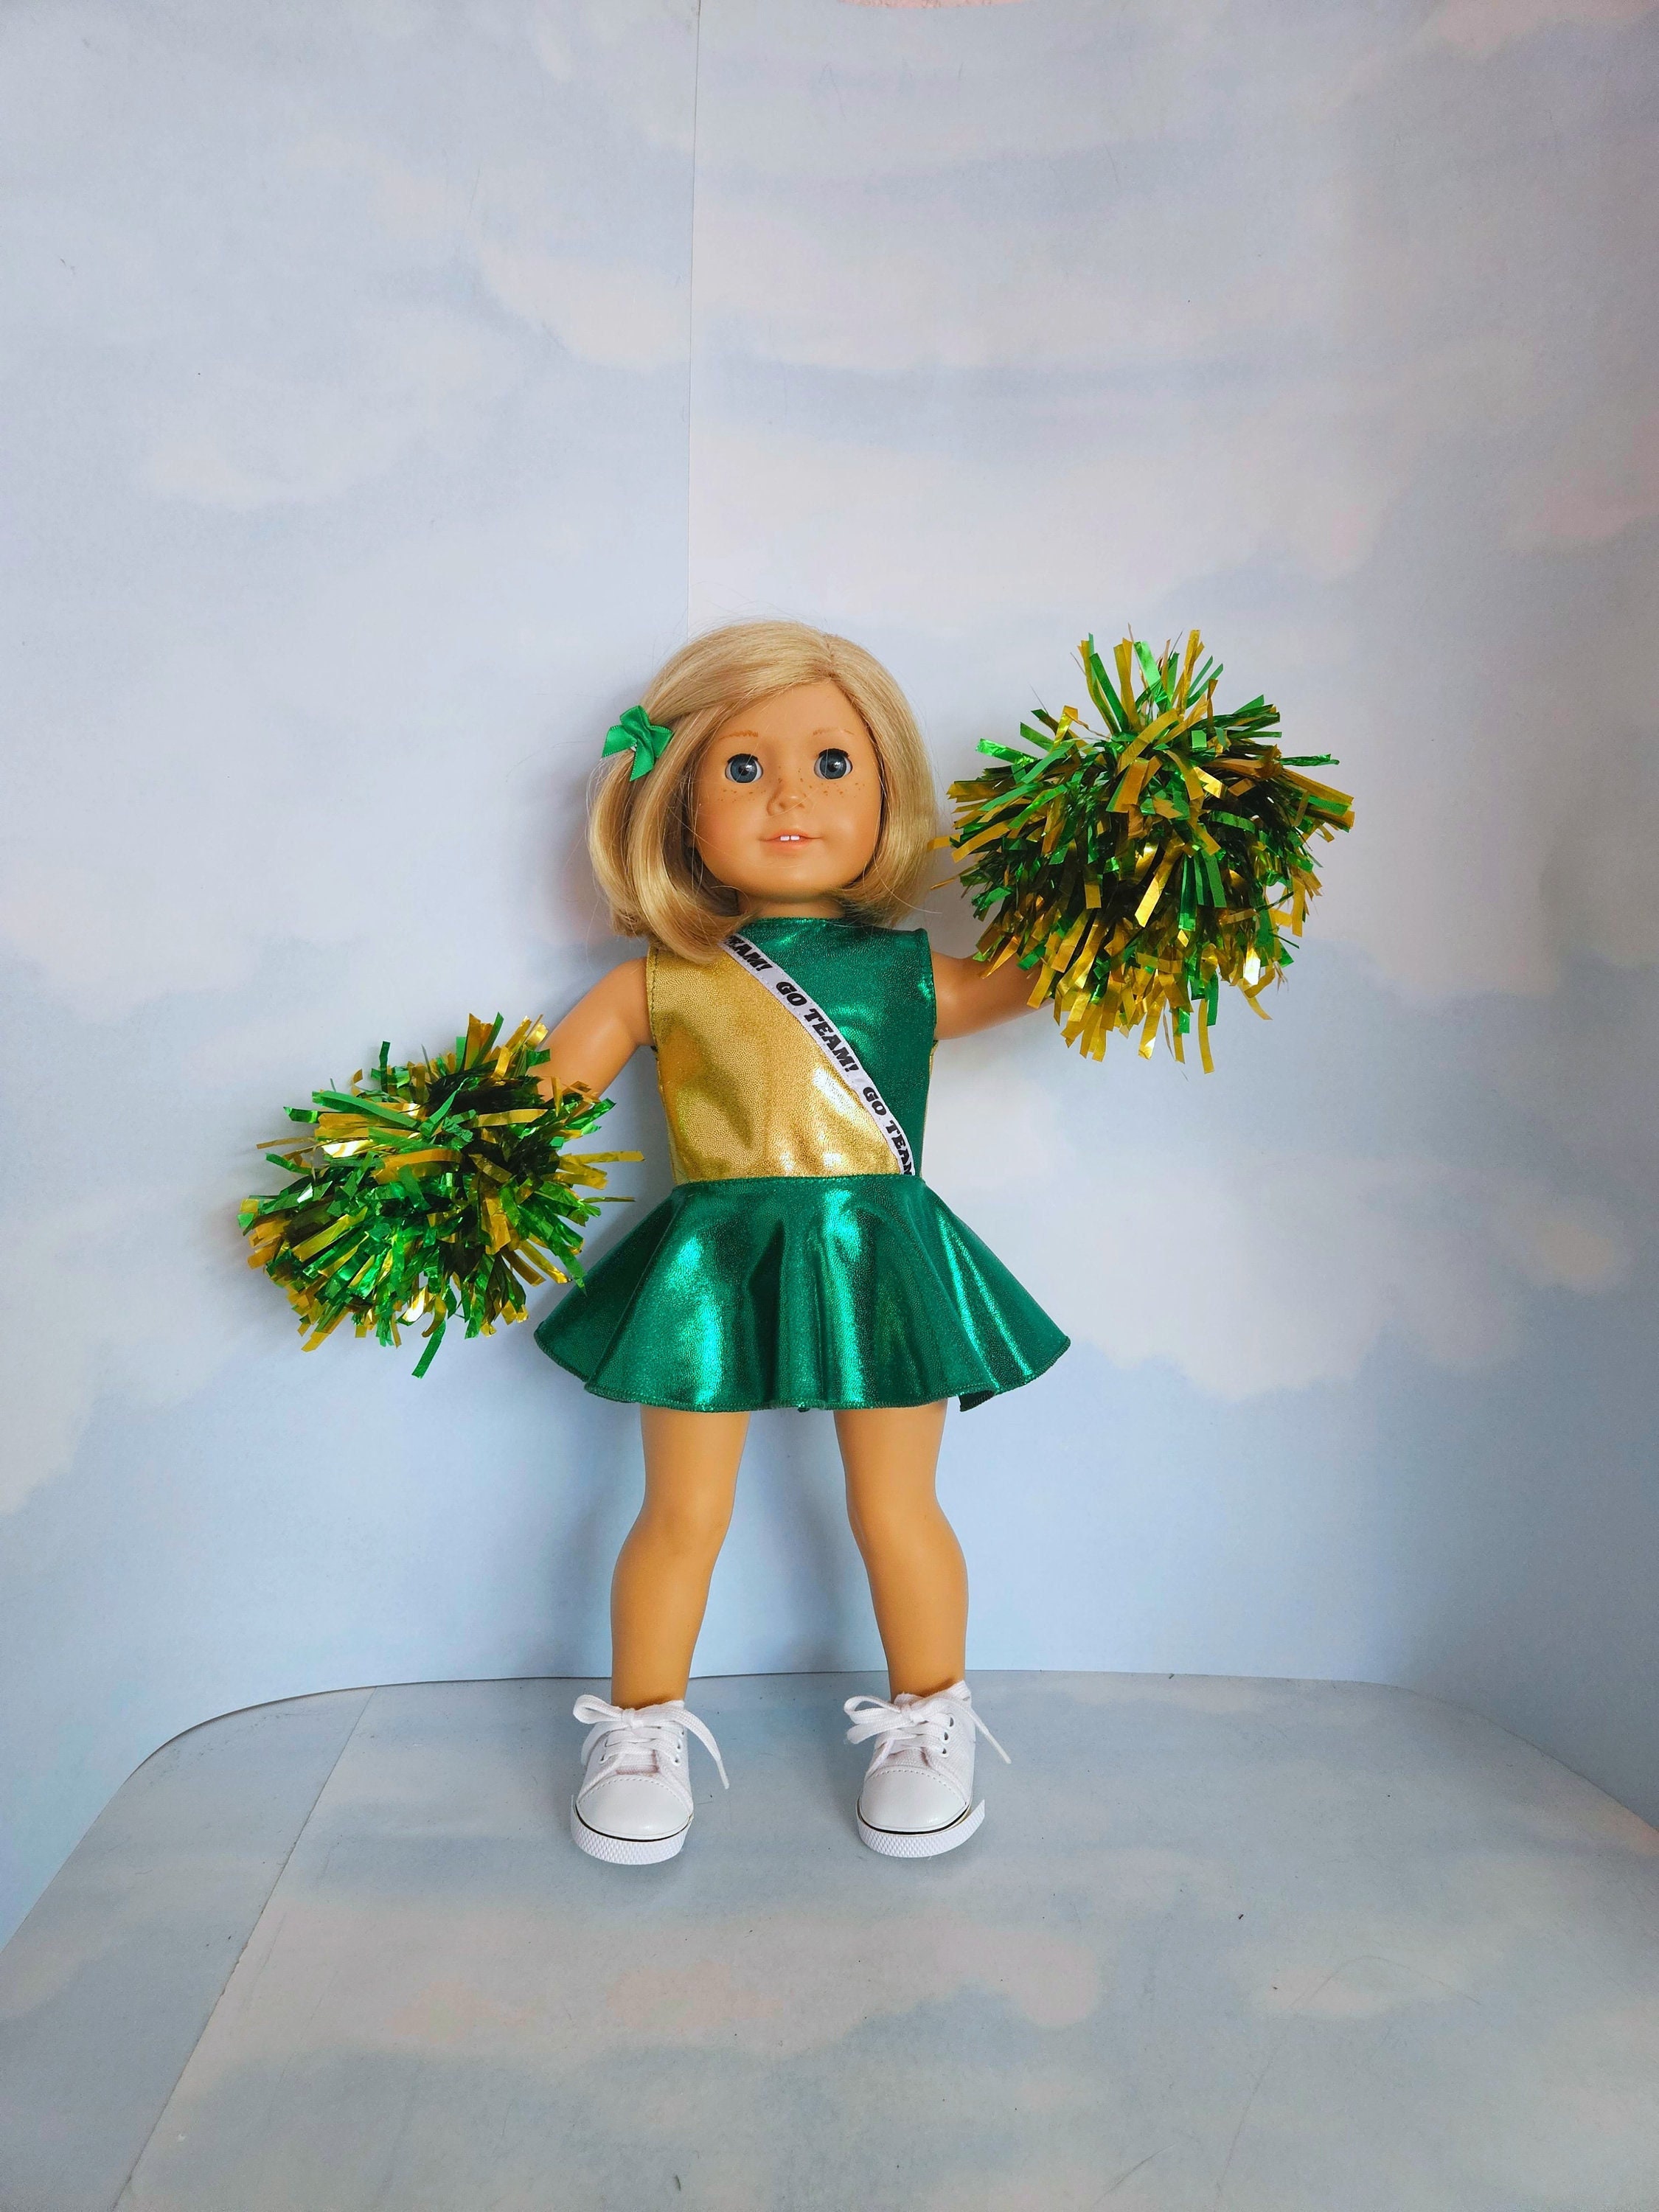  KAKALVER Cheerleader Costume for Girls Cheerleader Outfit with  Pom Poms for Halloween Sports Cheerleader Gifts : Clothing, Shoes & Jewelry